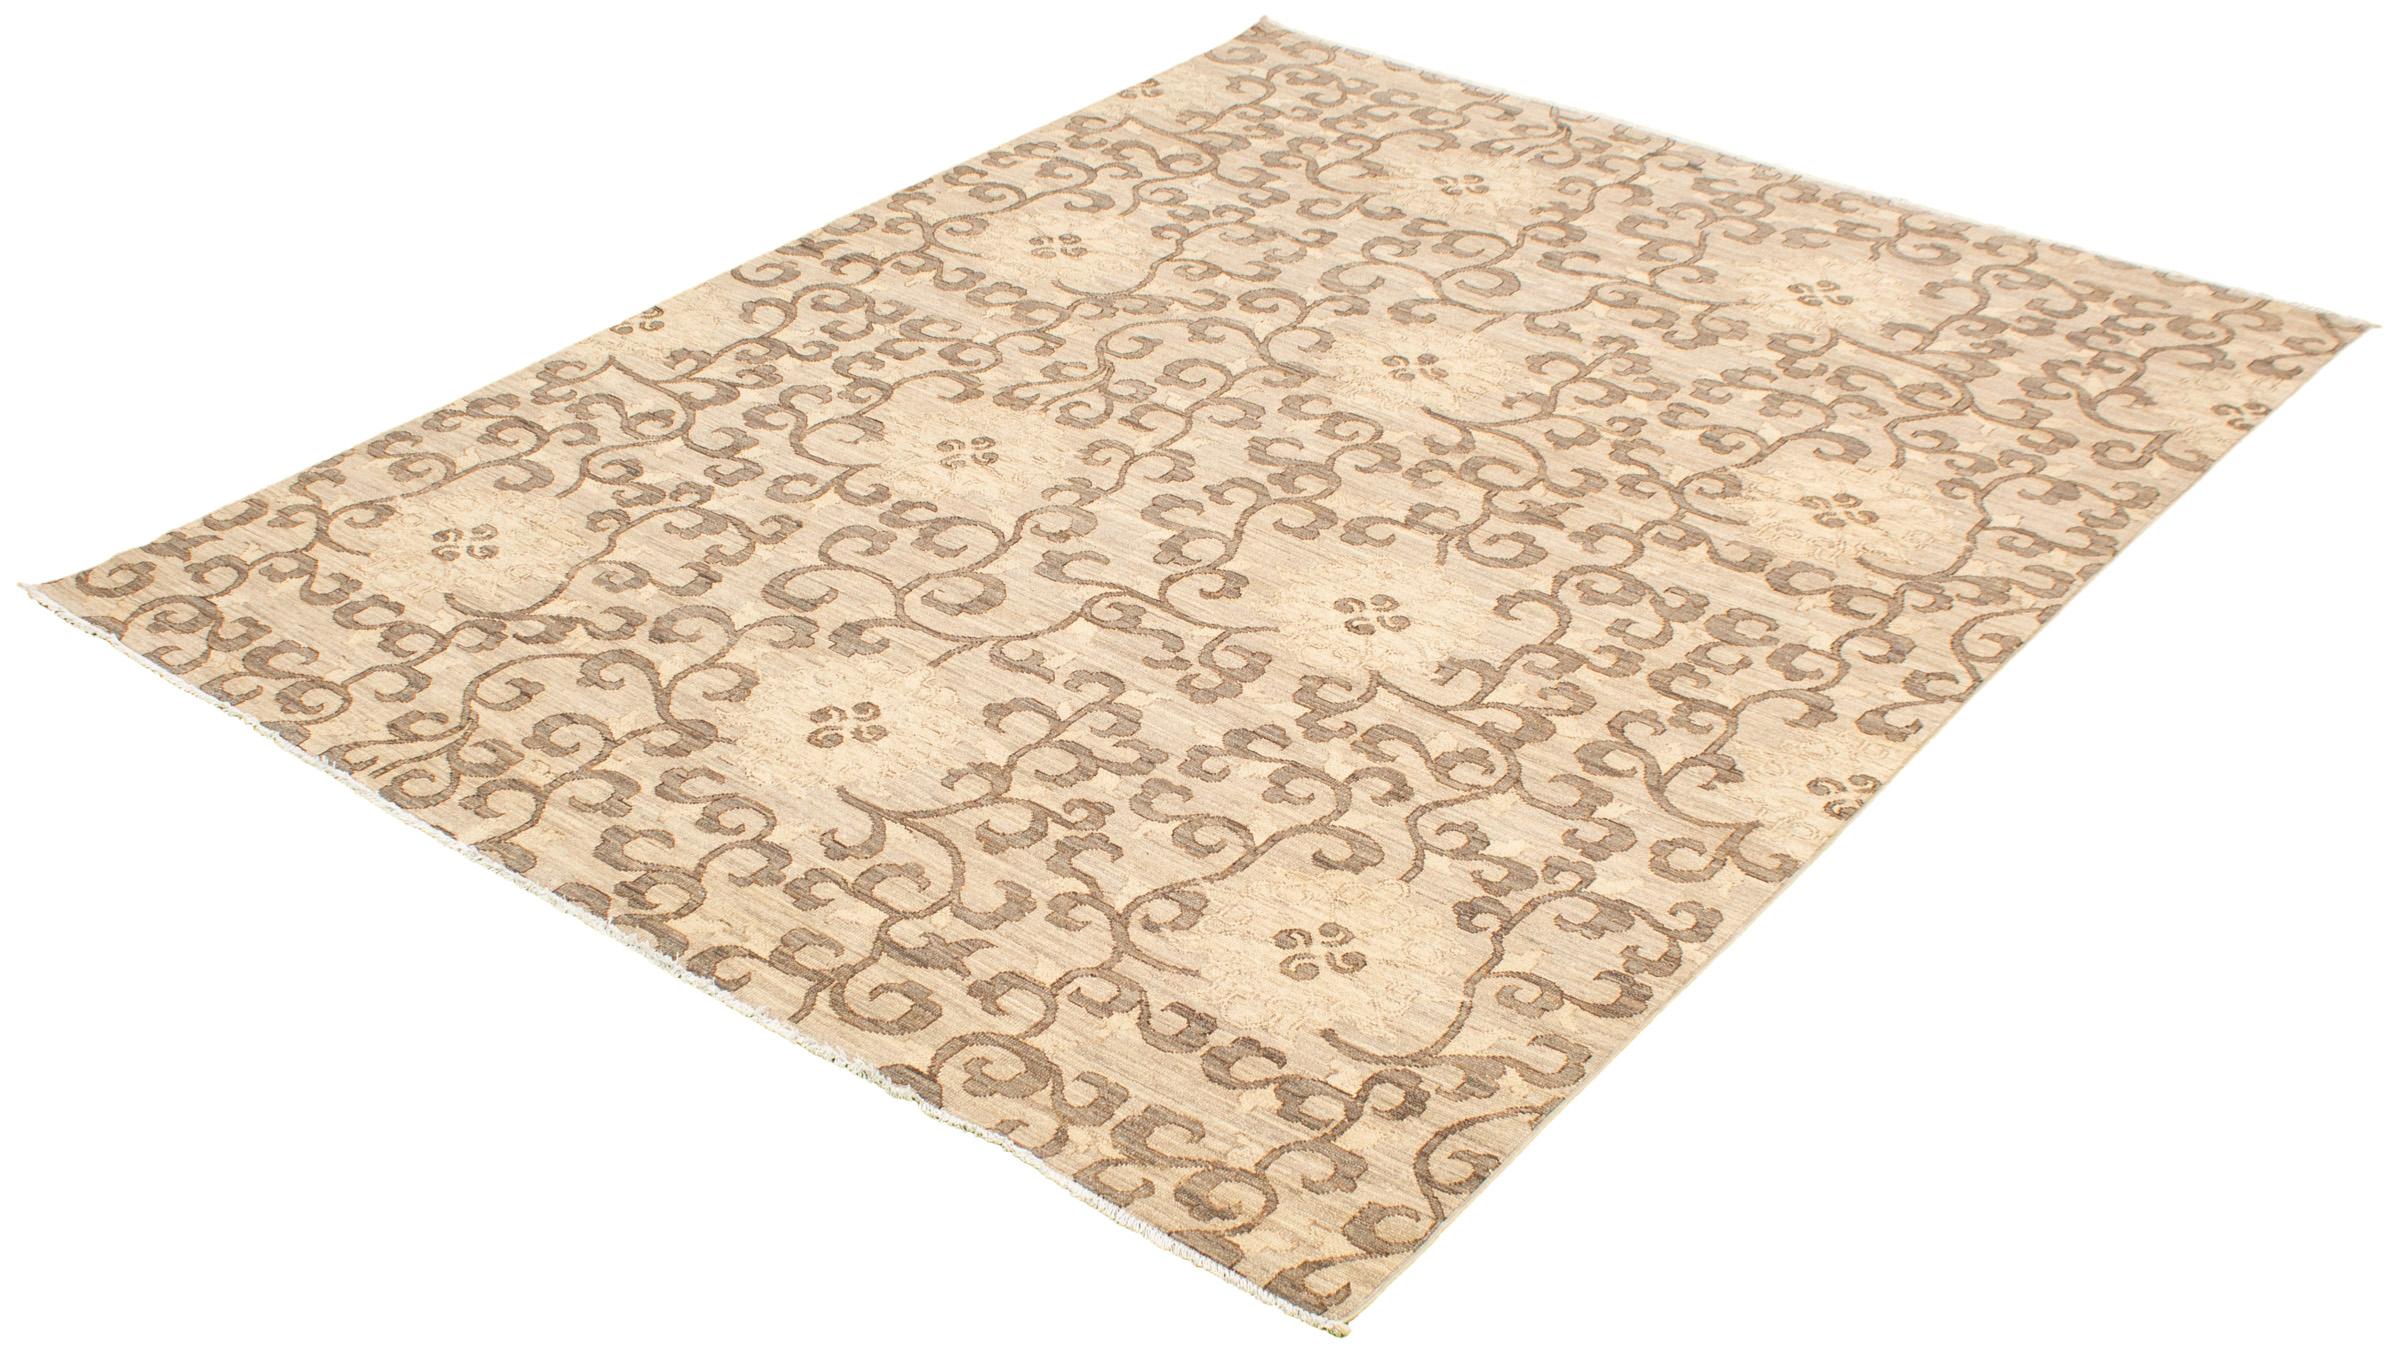 Contemporary Hand-Knotted Transitional Wool Persian Rug, Neutral Flower Motifs, 8' x 10' For Sale